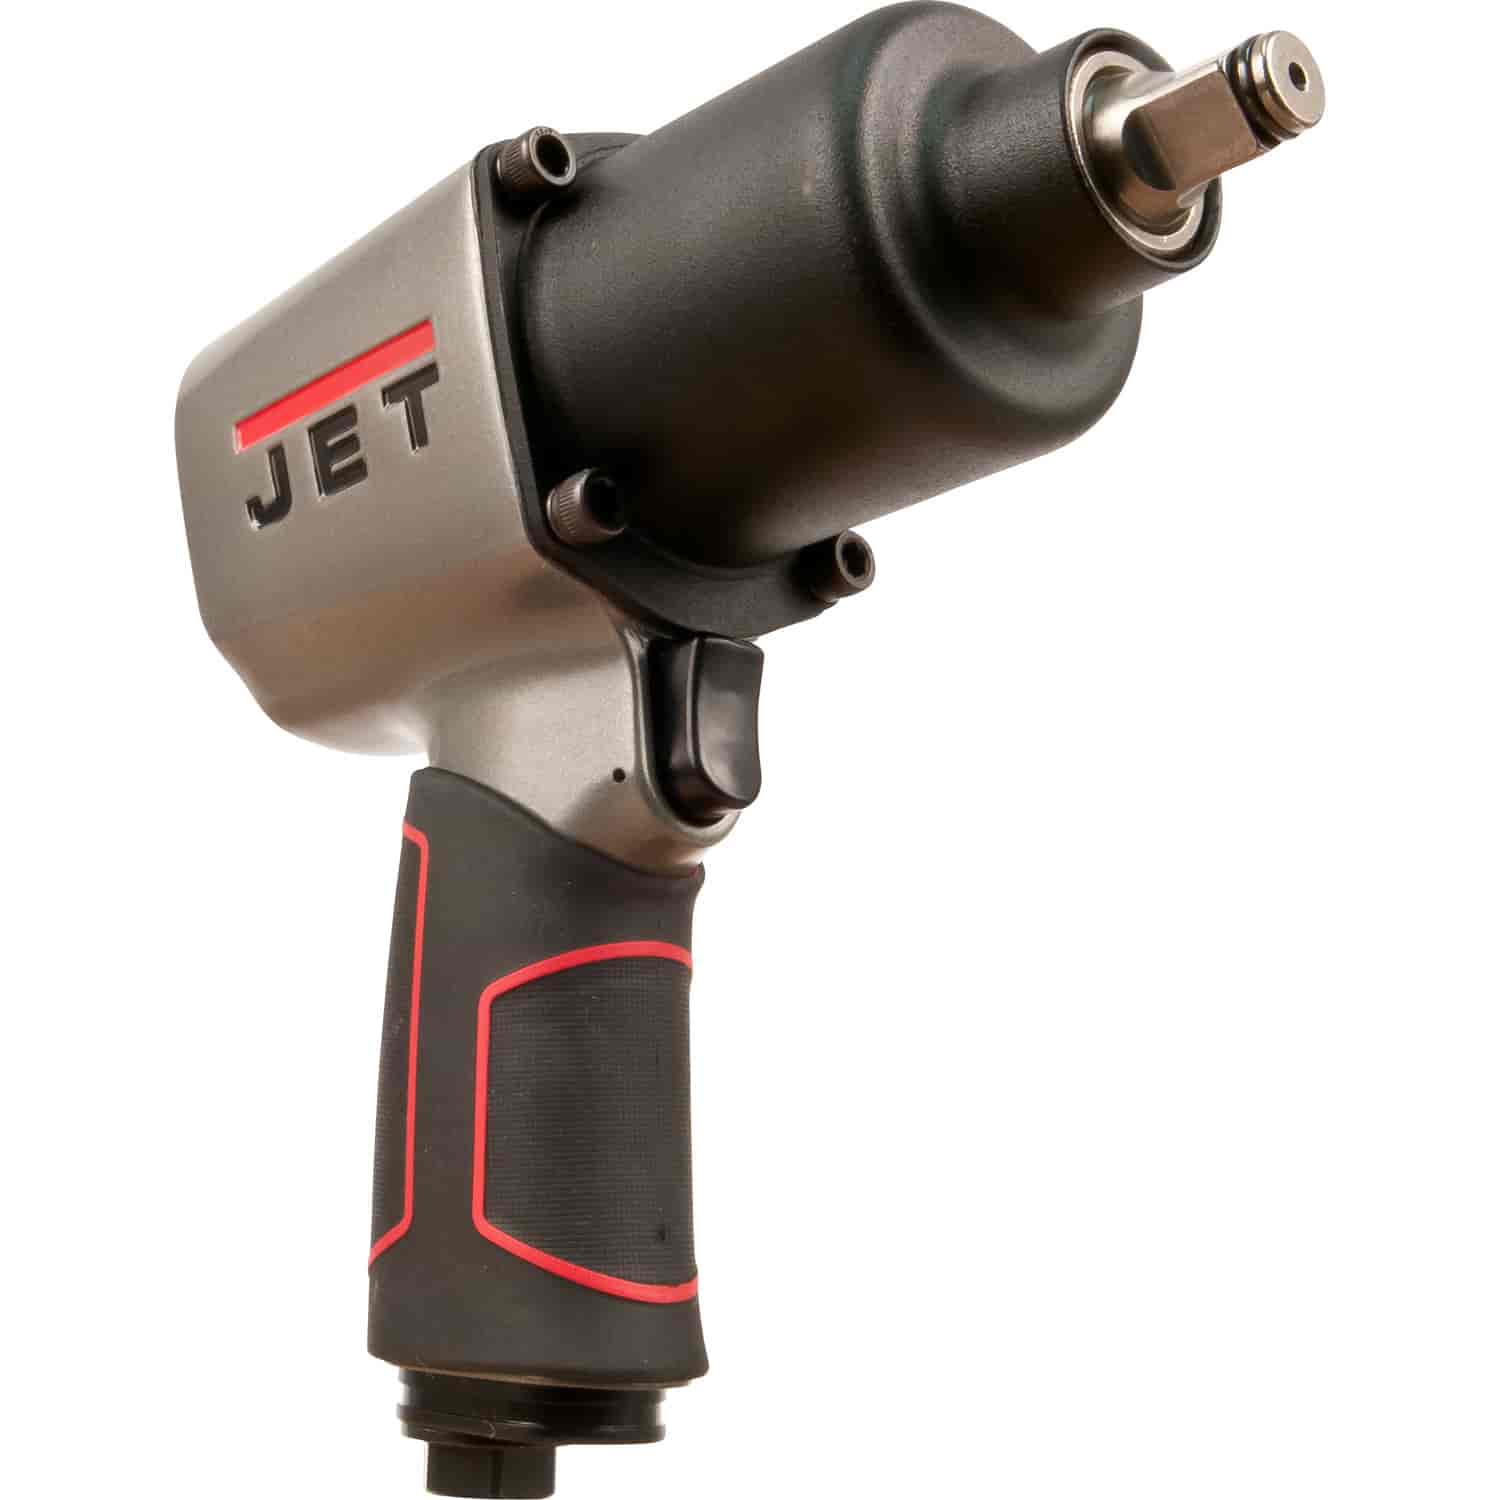 R8 1/2" Air Impact Wrench Square Drive: 1/2"